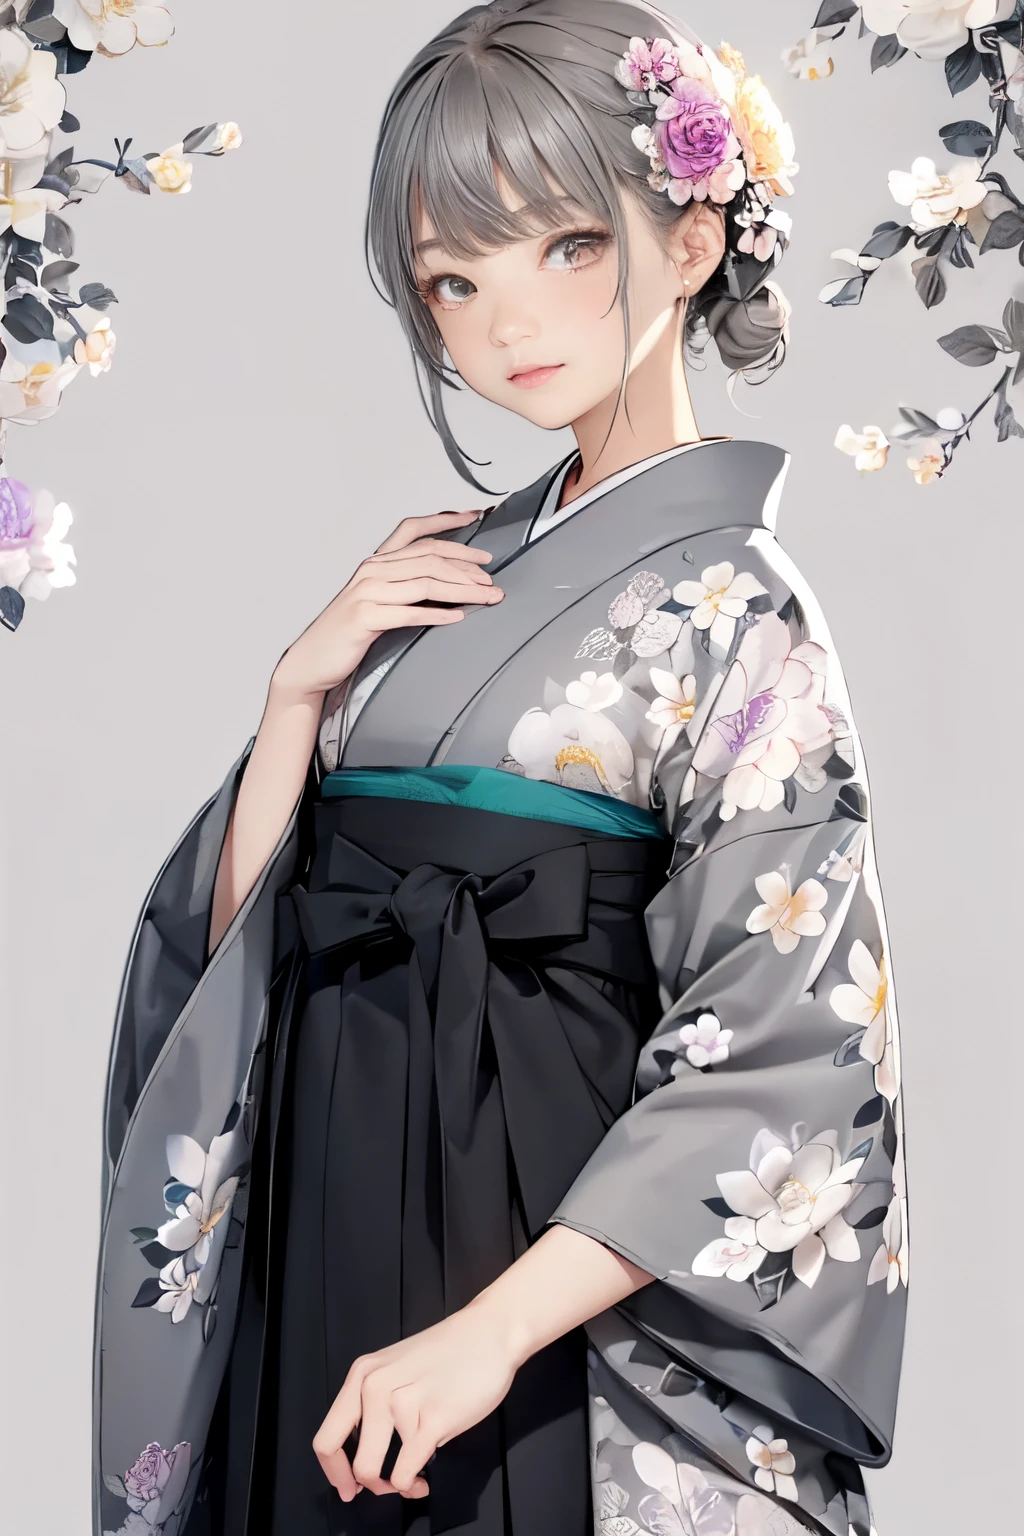 (((gray floral background:1.3)))、Best Quality, masutepiece, High resolution, (((1girl in))), sixteen years old,(((Eyes are gray:1.3)))、Gray kimono、((beautiful gray kimono)), Tindall Effect, Realistic, Shadow Studio,Ultramarine Lighting, dual-tone lighting, (High Detail Skins: 1.2)、Pale colored lighting、Dark lighting、 Digital SLR, Photo, High resolution, 4K, 8K, Background blur,Fade out beautifully、gray flower world